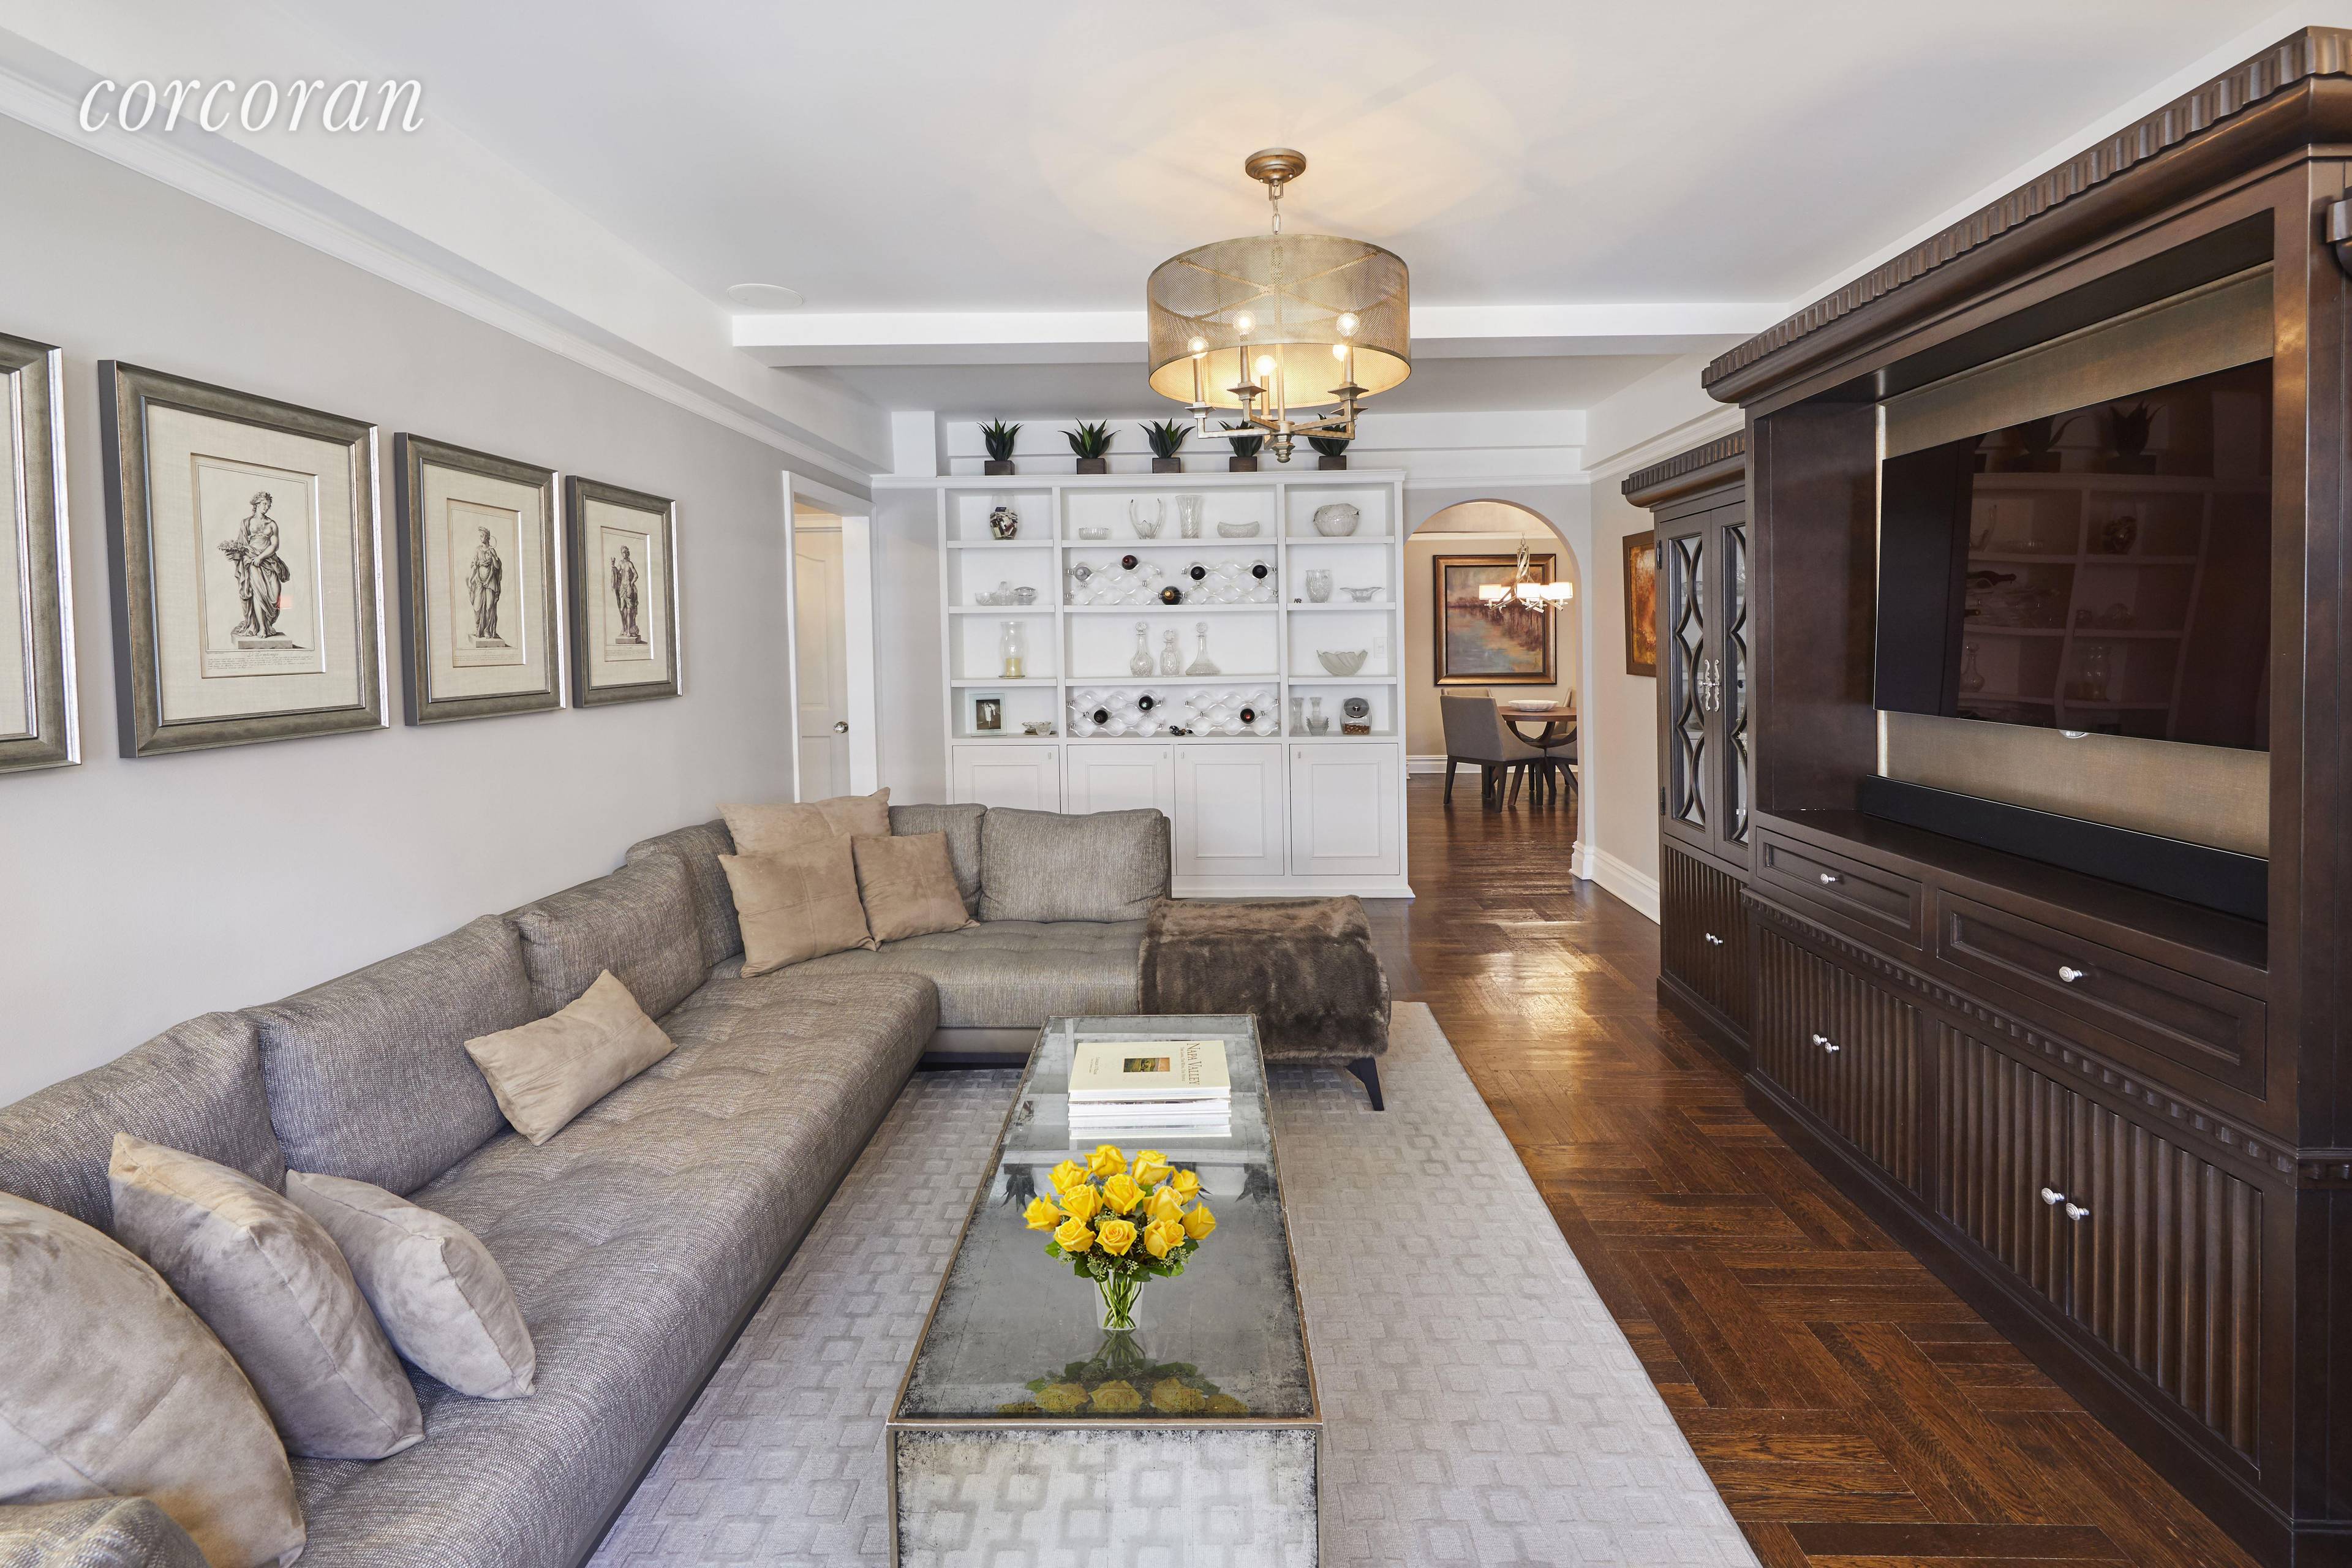 Whether used as a permanent residence or an elegant pied a terre, 60 Gramercy Park North 8M combines modern updates with lovely prewar touches.